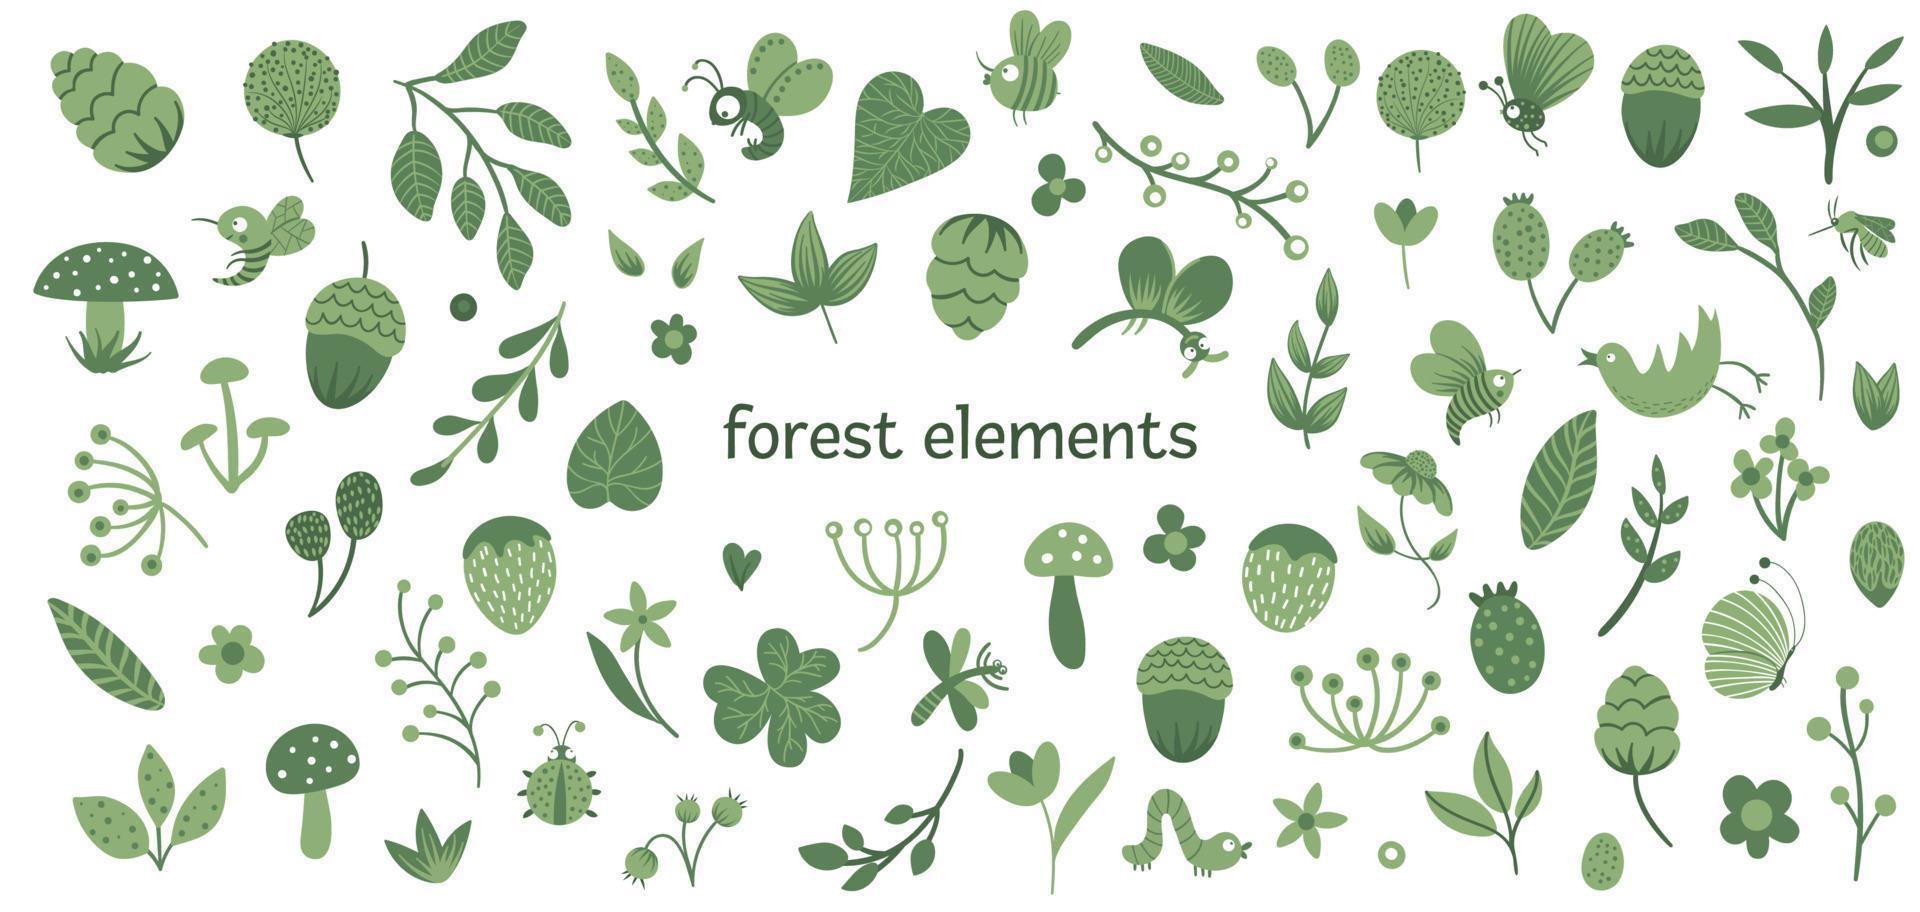 Vector set of cute flat woodland insects and plants. Forest elements collection. Beautiful childish design for stationery, textile, wallpapers. Monochrome green color.